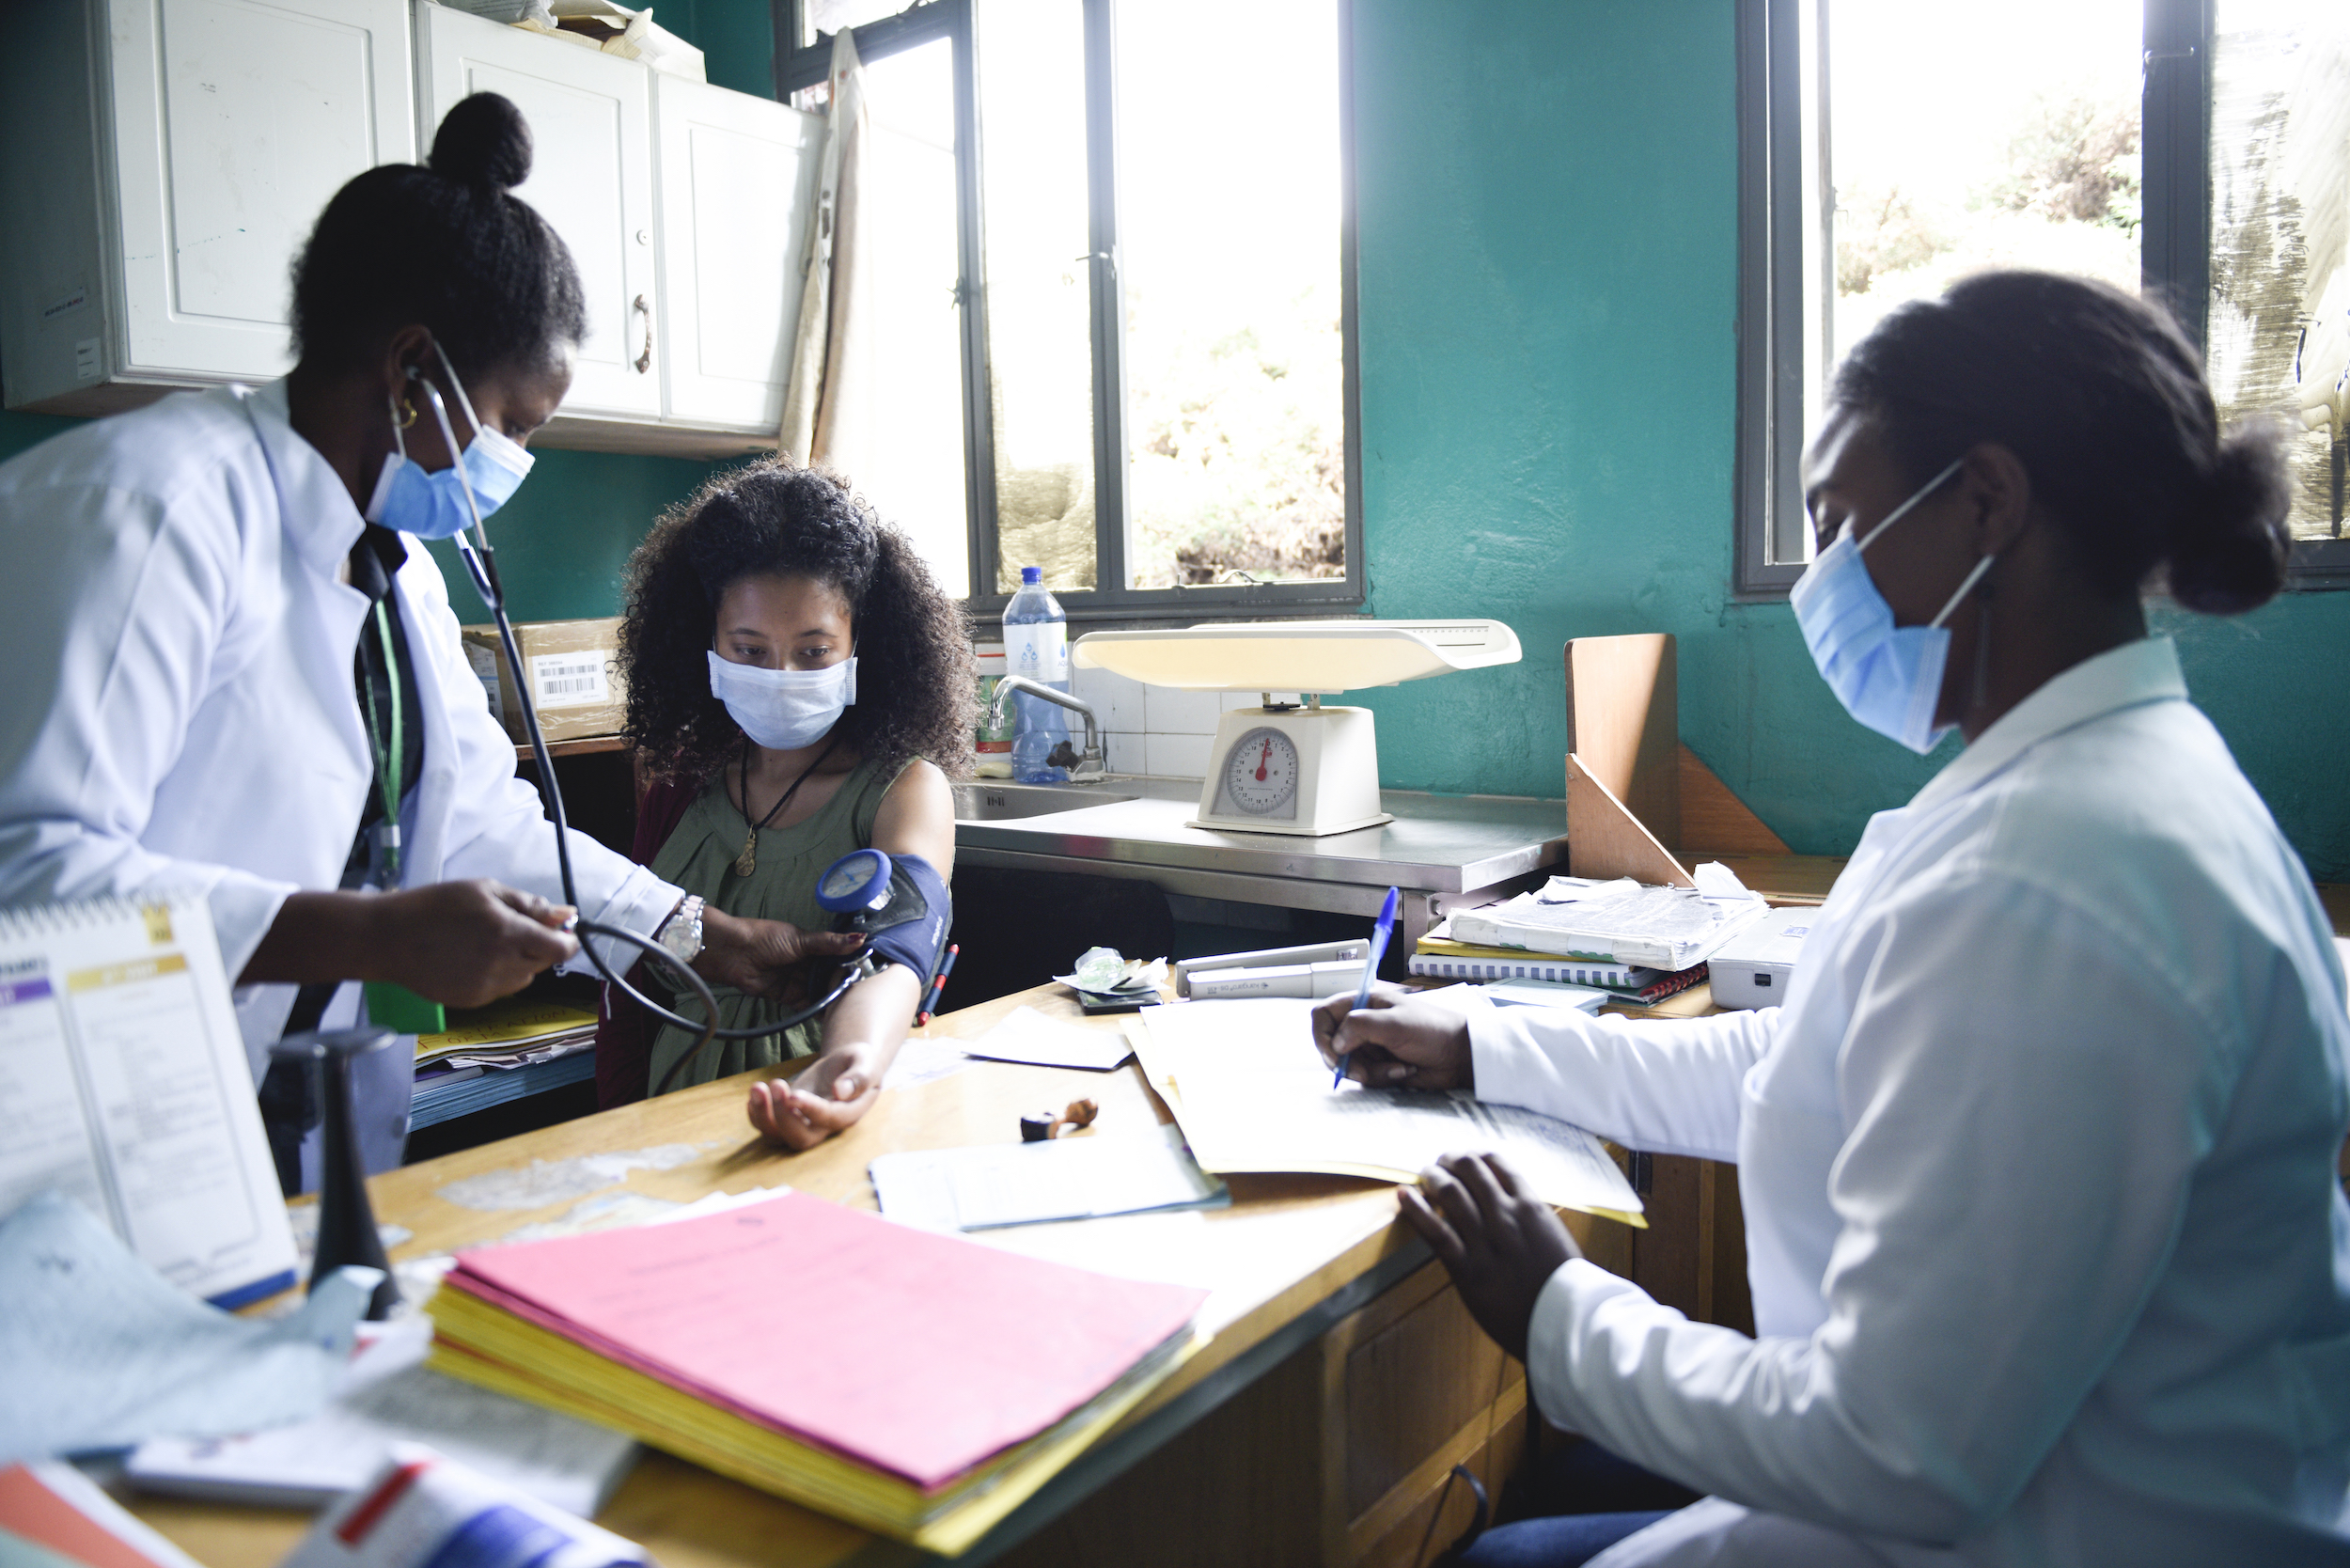 Ethiopia healthcare workers and patient wearing face masks